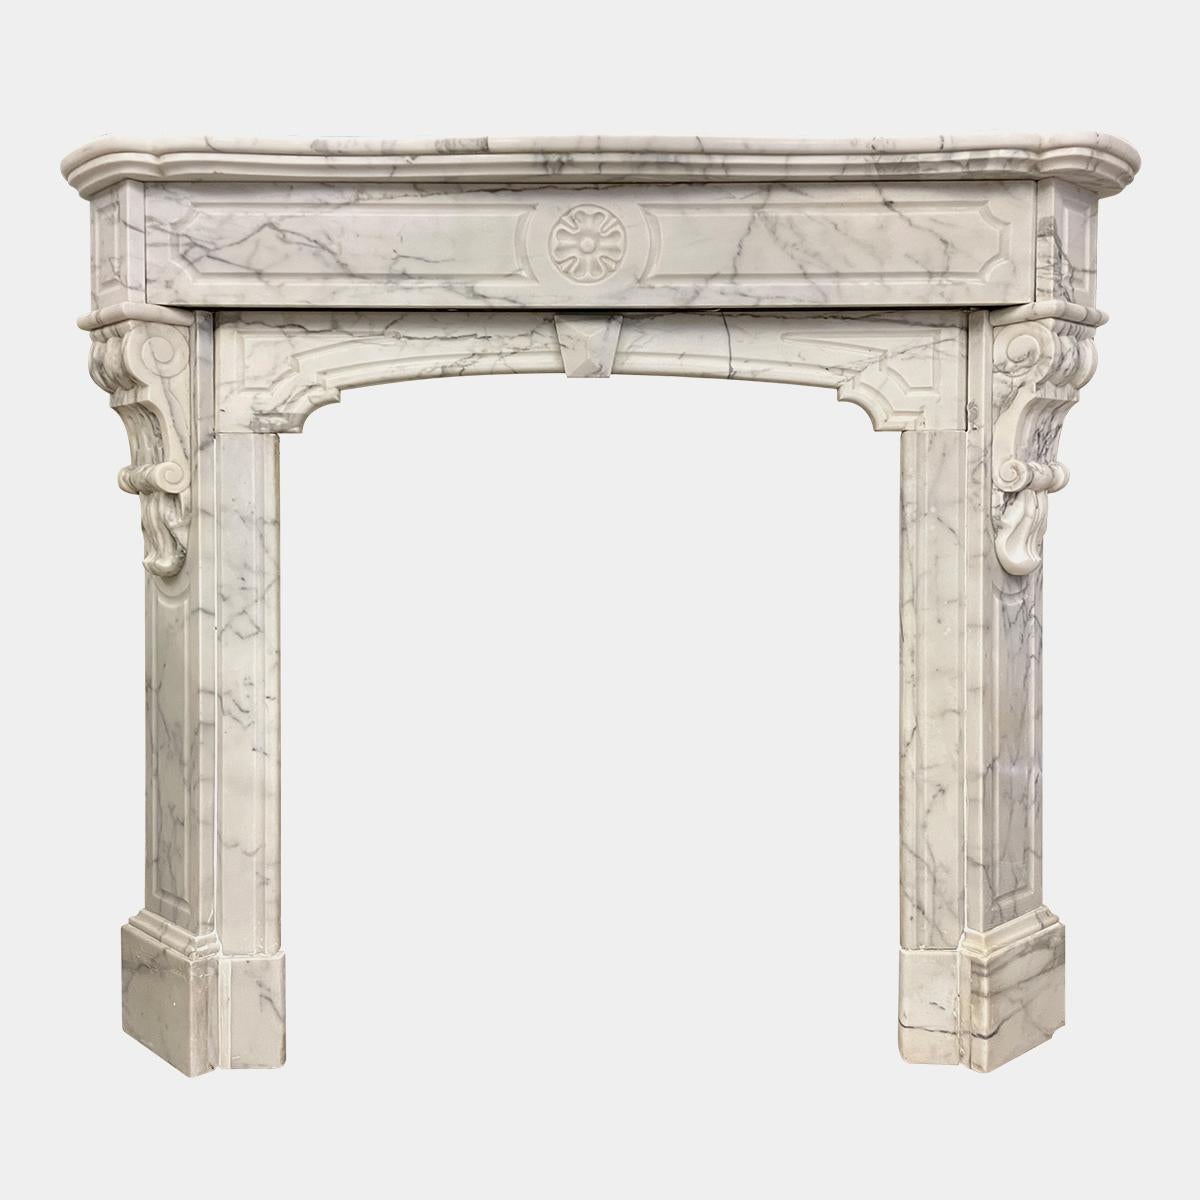 19th Century Antique French Fireplace Mantel in Arabescato Marble